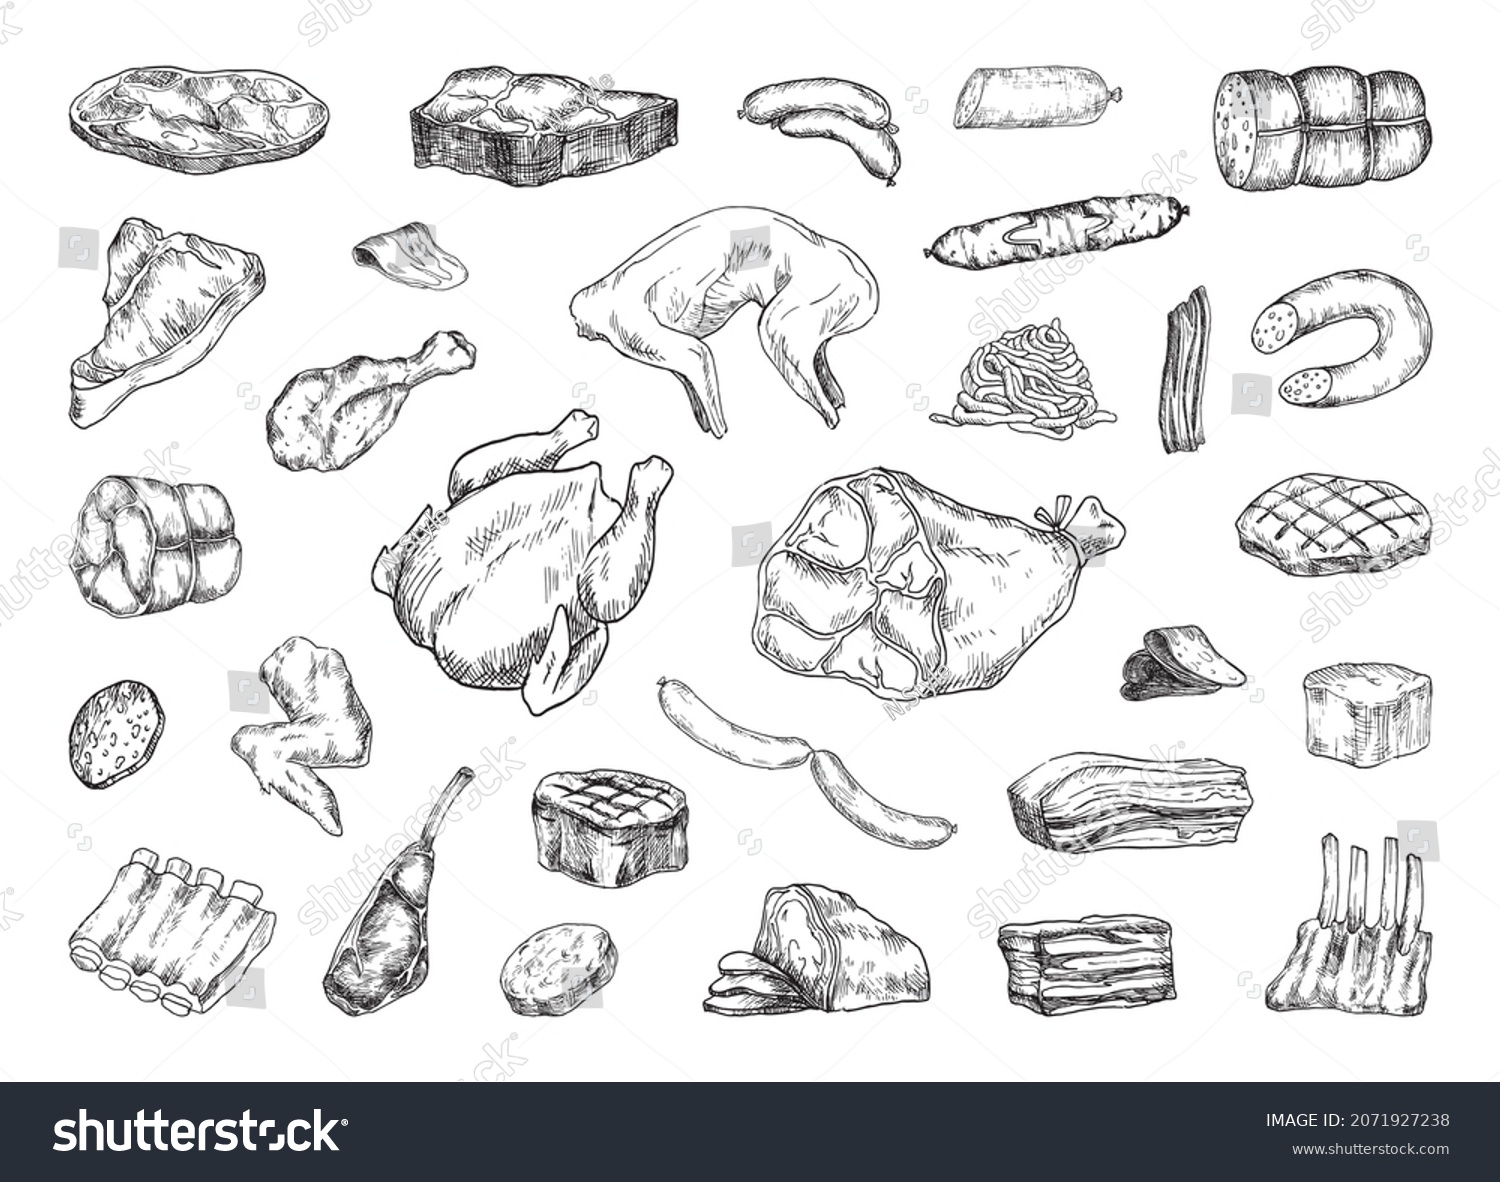 SVG of Collection of monochrome illustrations of meat products in sketch style. Hand drawings in art ink style. Black and white graphics. svg